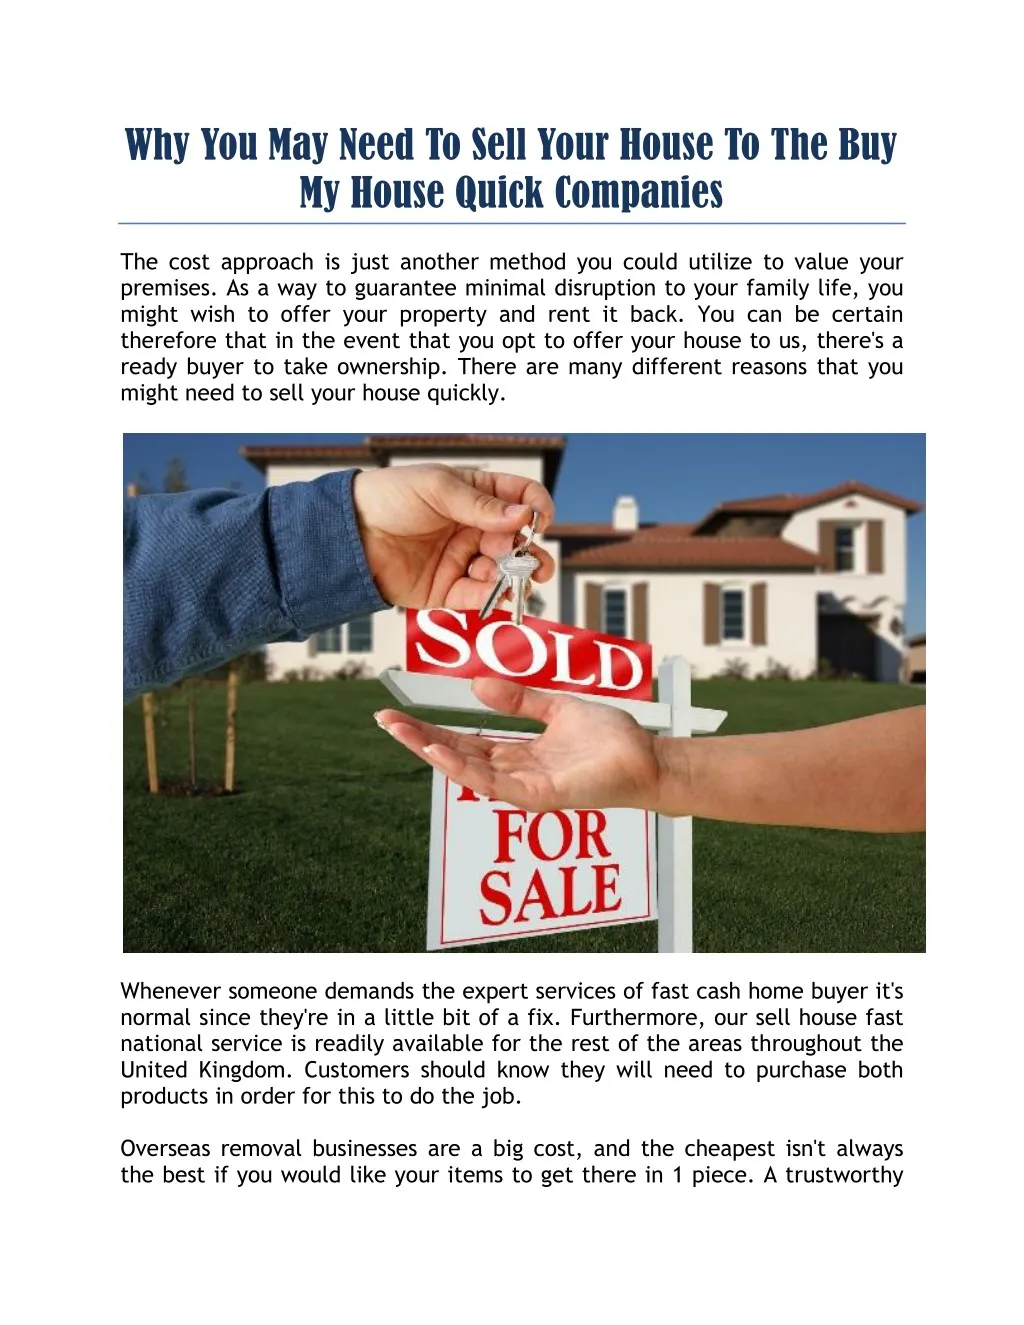 why you may need to sell your house